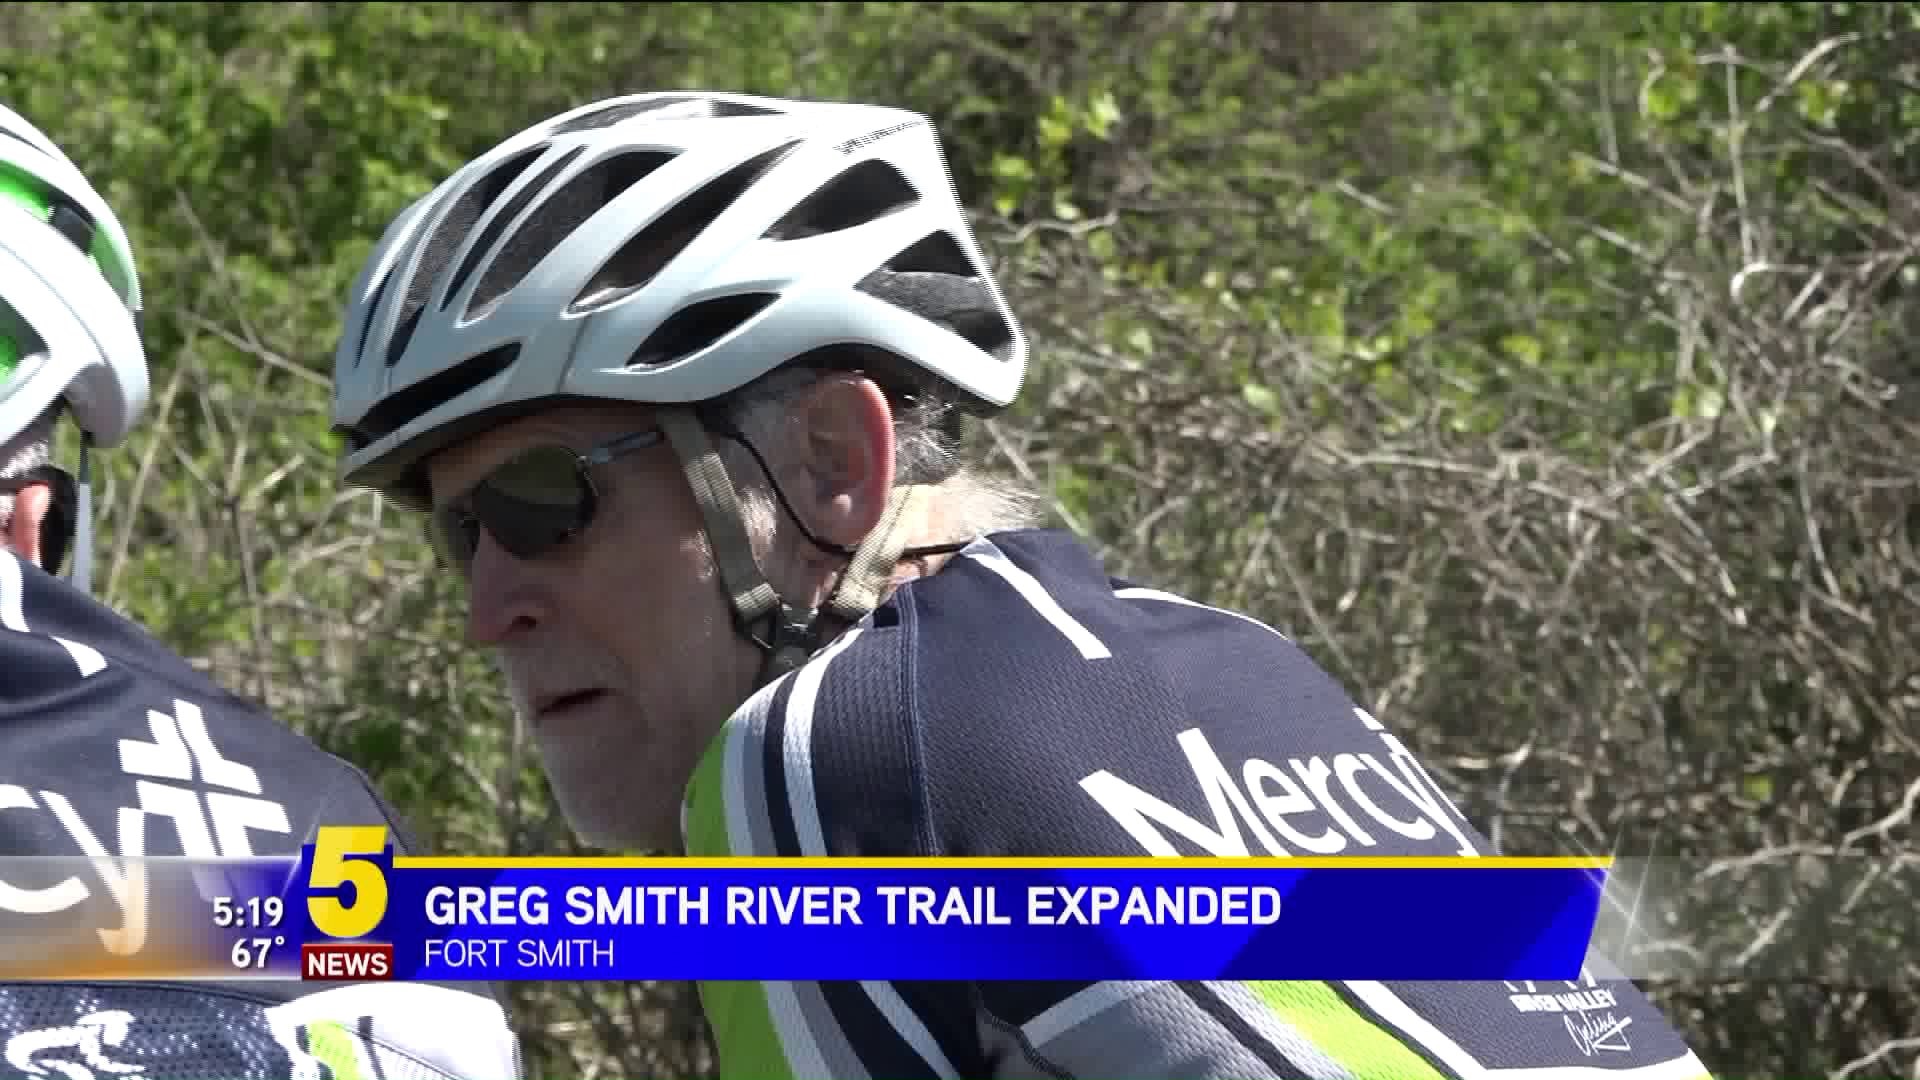 Greg Smith River Trail Expanded